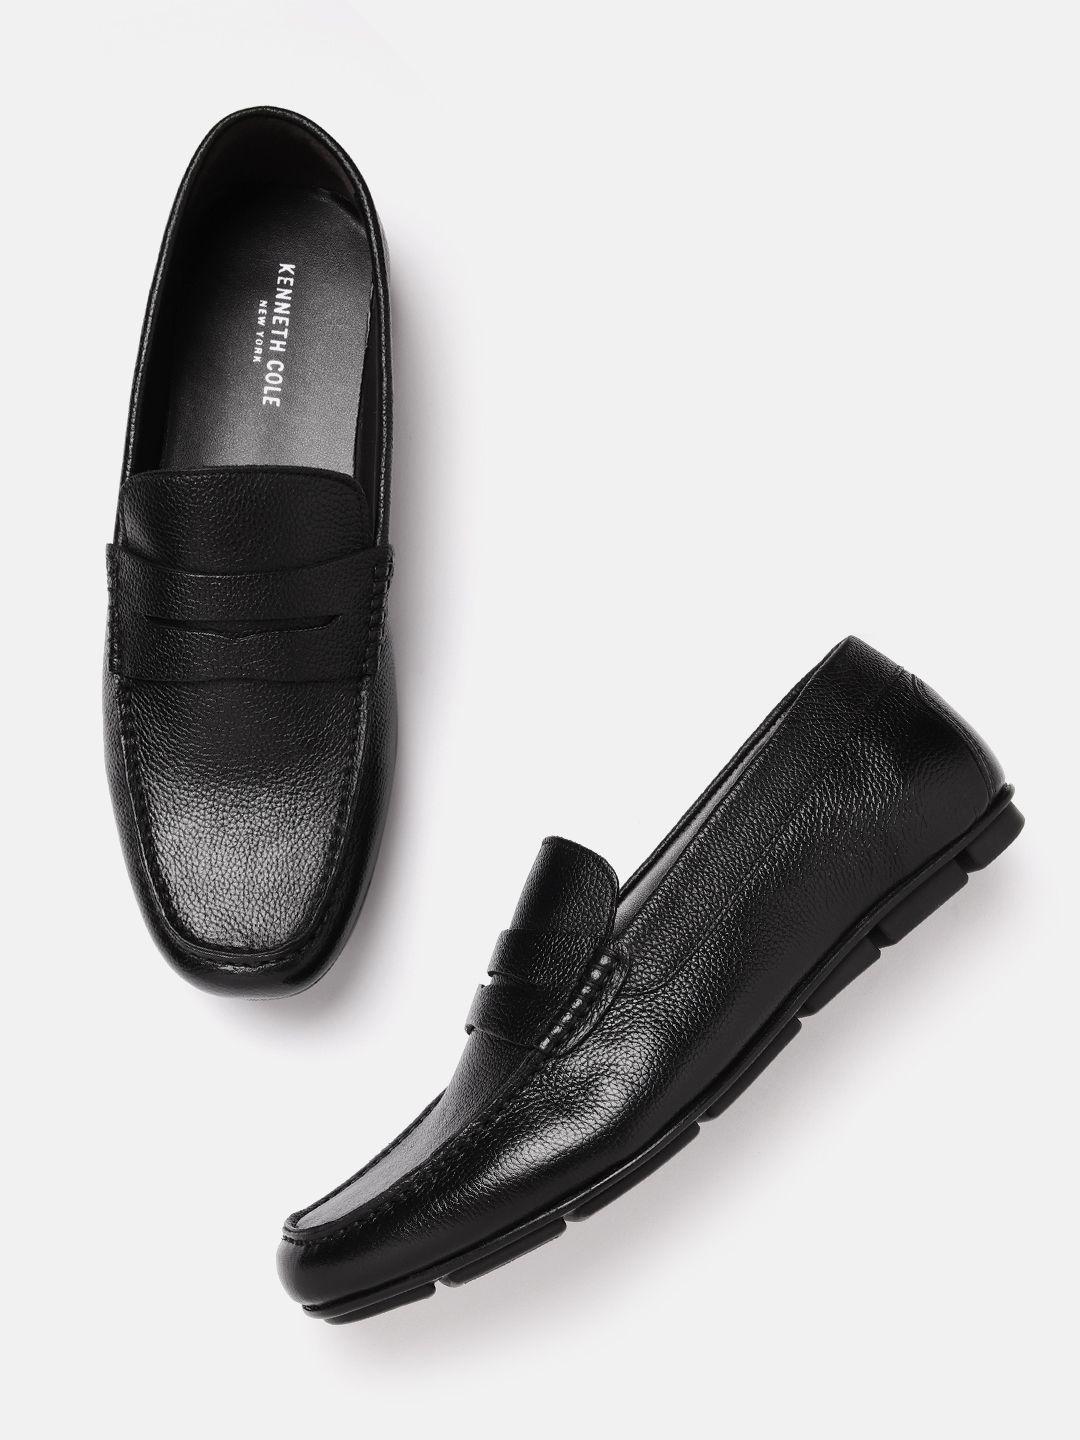 kenneth-cole-men-round-toe-textured-formal-penny-loafers